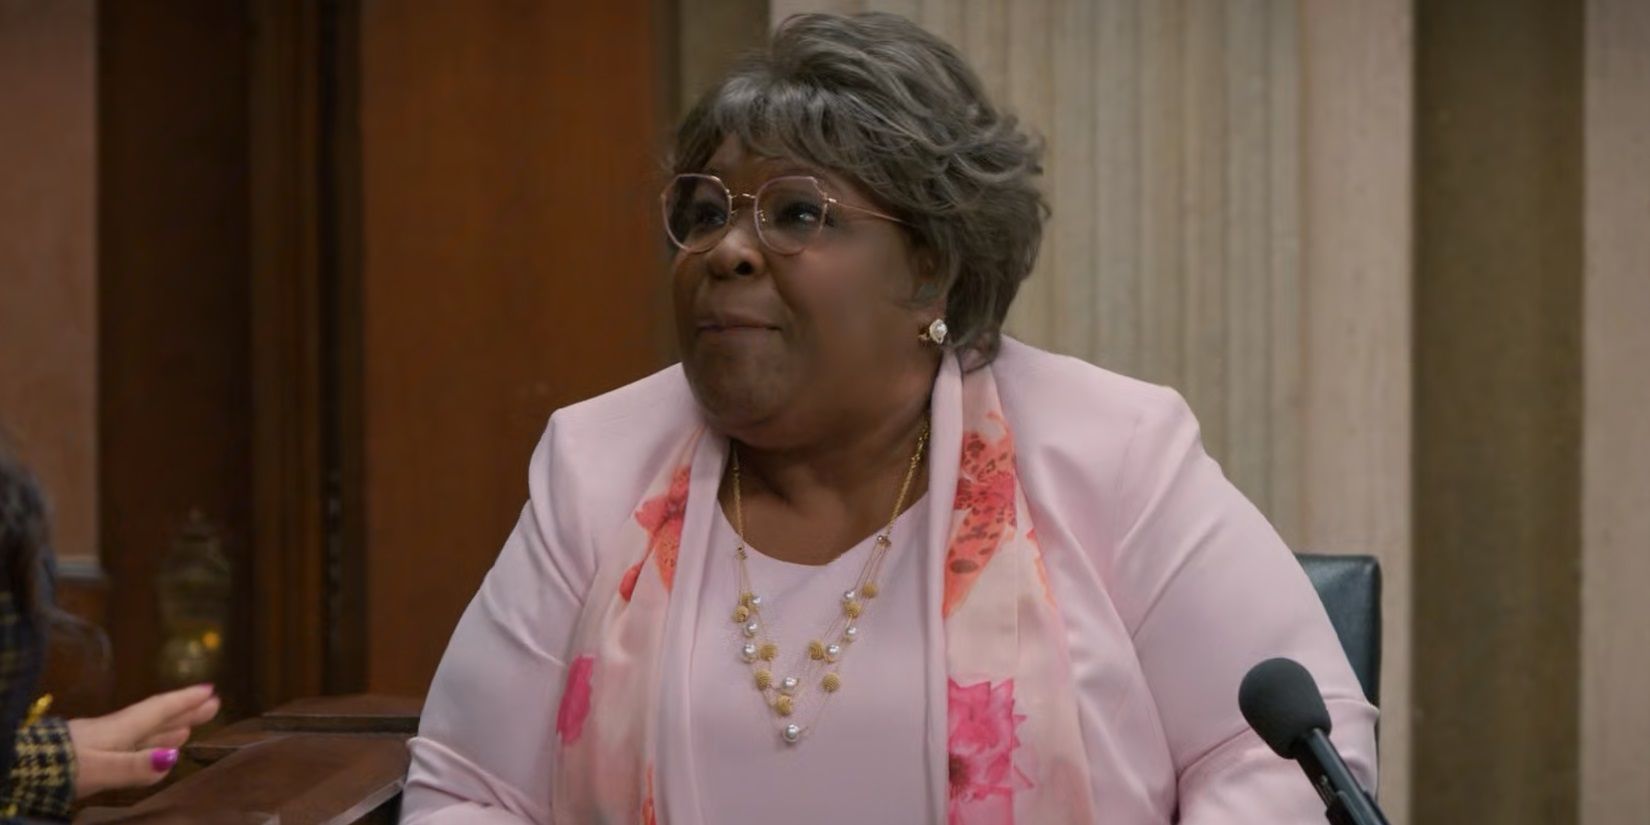 Auntie Rae takes the stand in Curb Your Enthusiasm